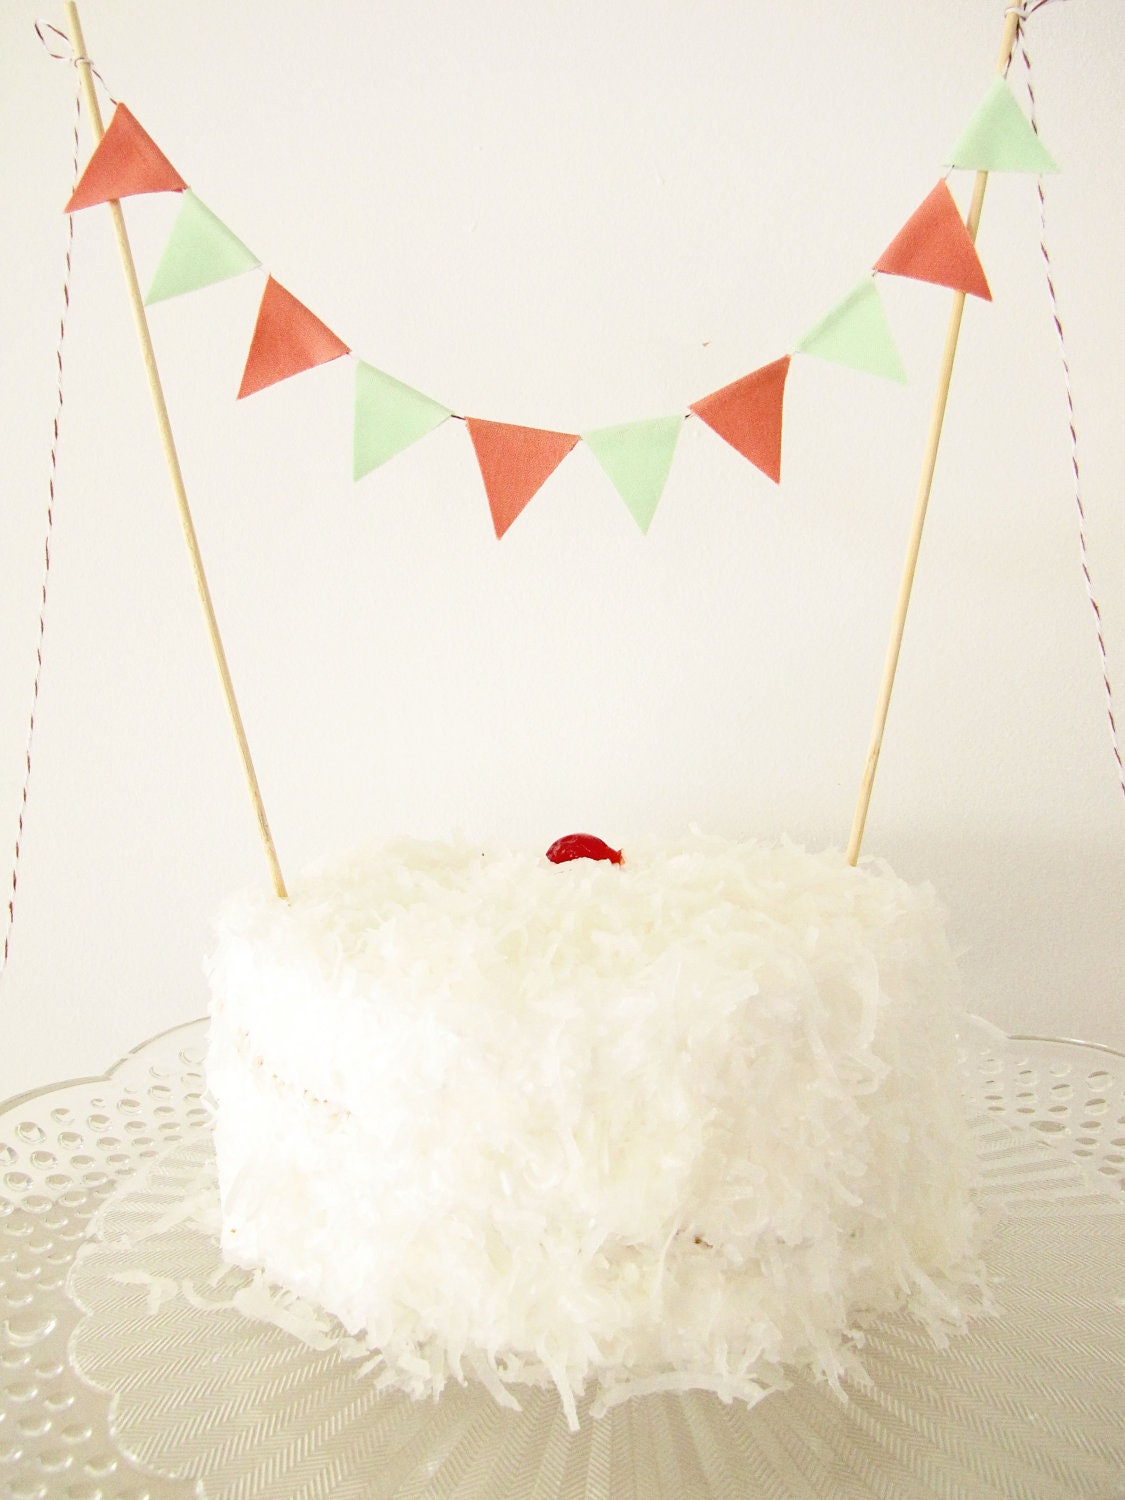 Fabric Cake Bunting Decoration - Cake Topper -  Wedding, Birthday Party, Shower Decor in peach and mint